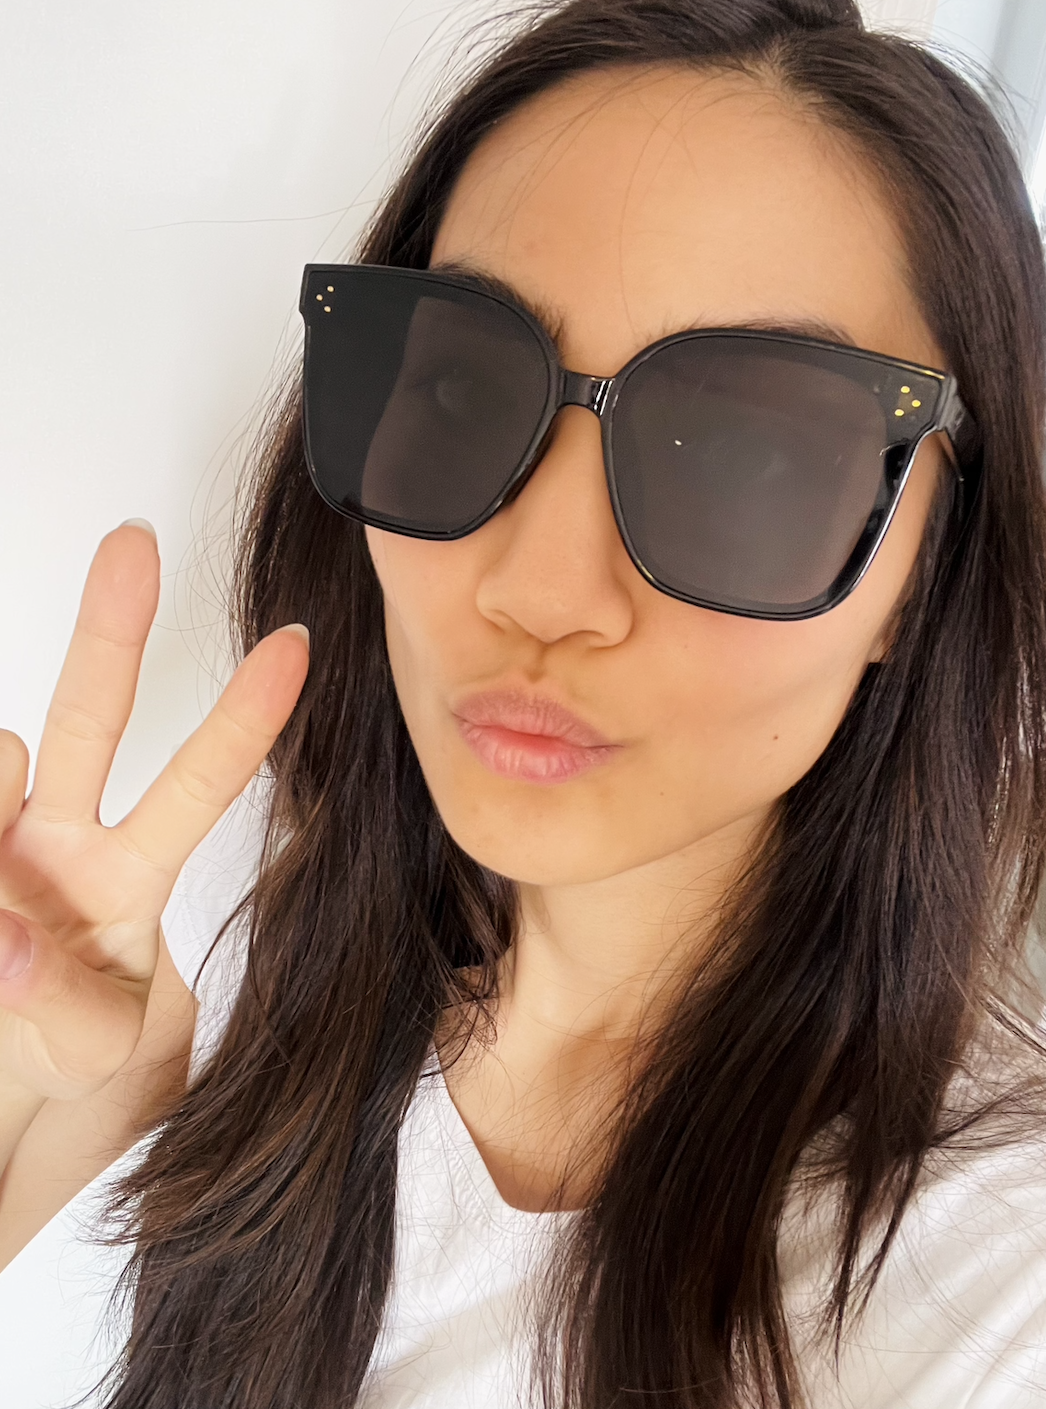 May with the glasses on making a peace sign